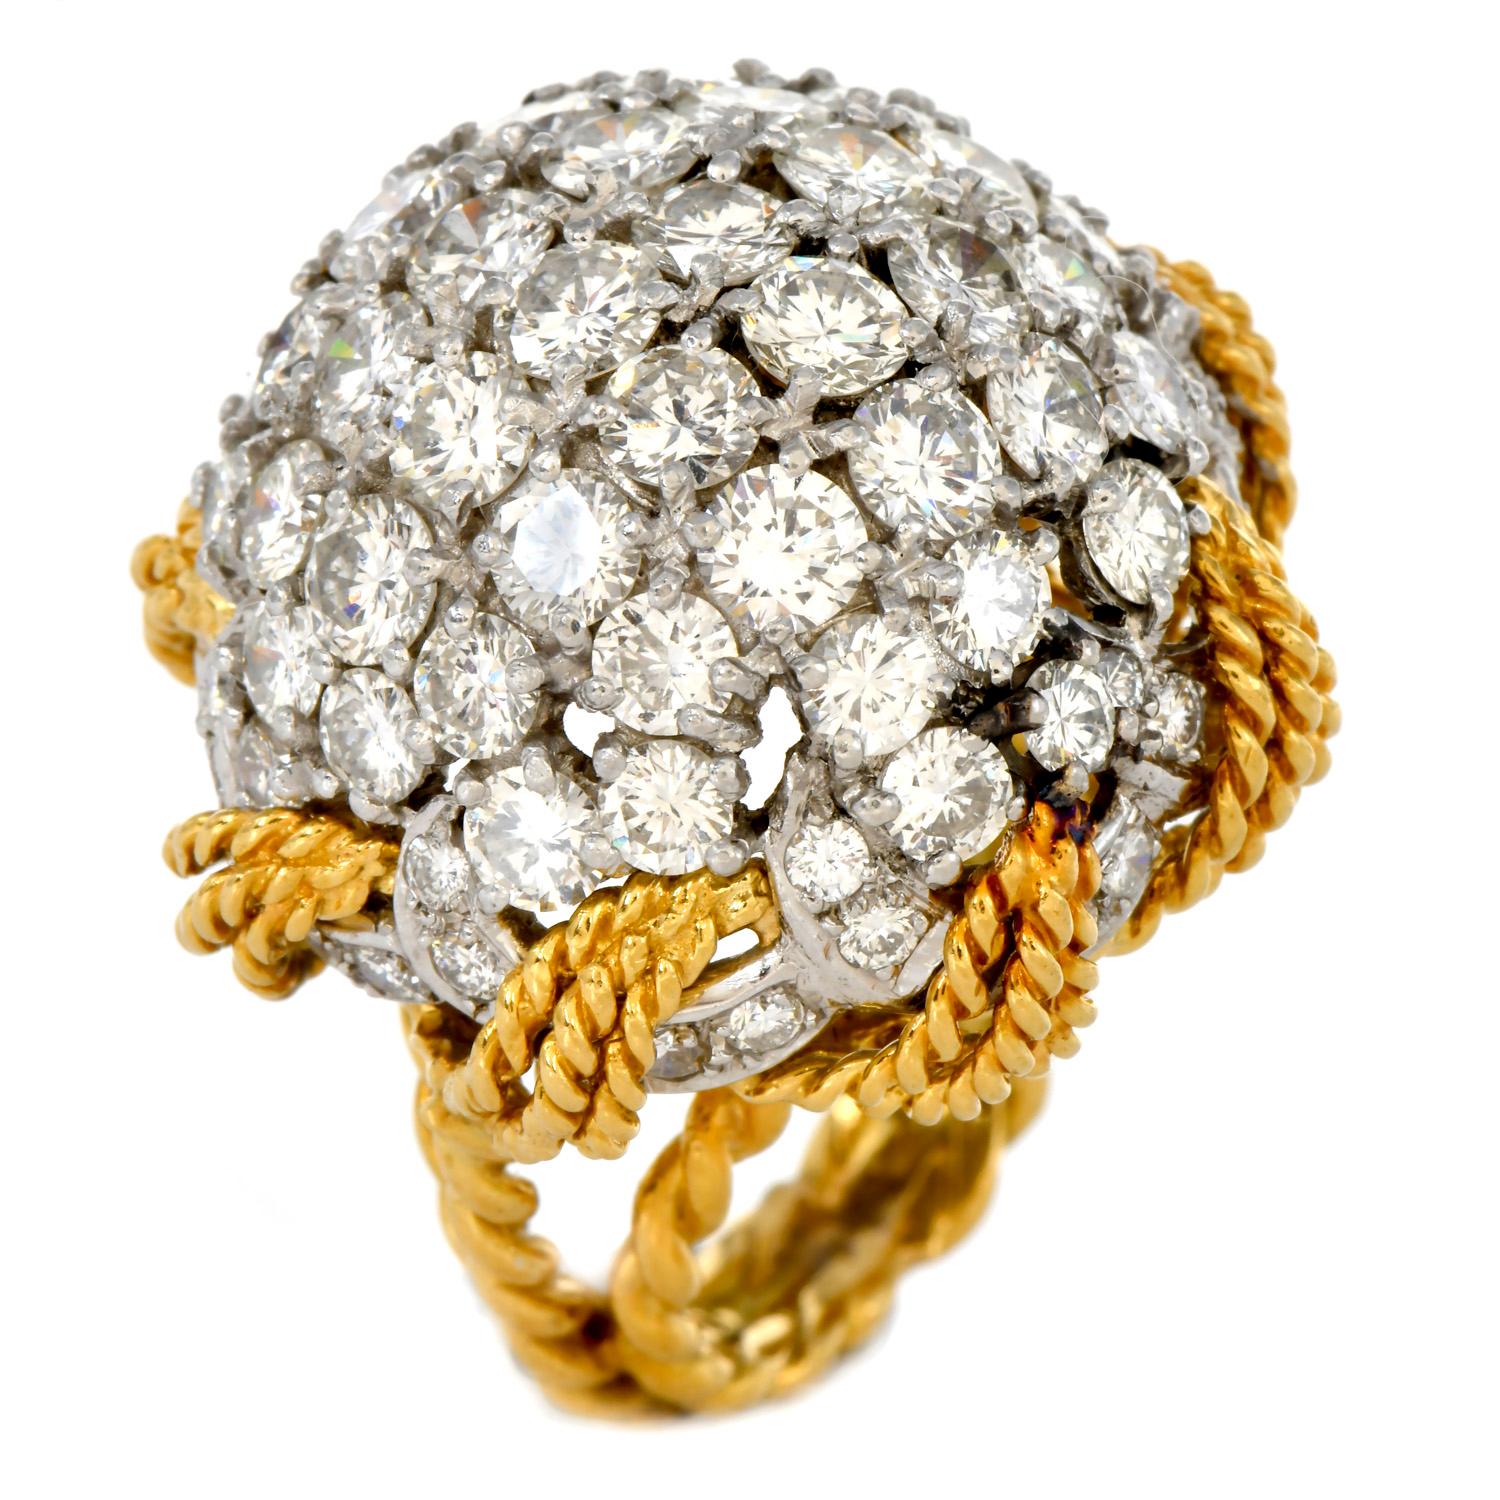 1970's Bombe Large Diamond Cluster 18K Gold Platinum Rope Dome Cocktail Ring